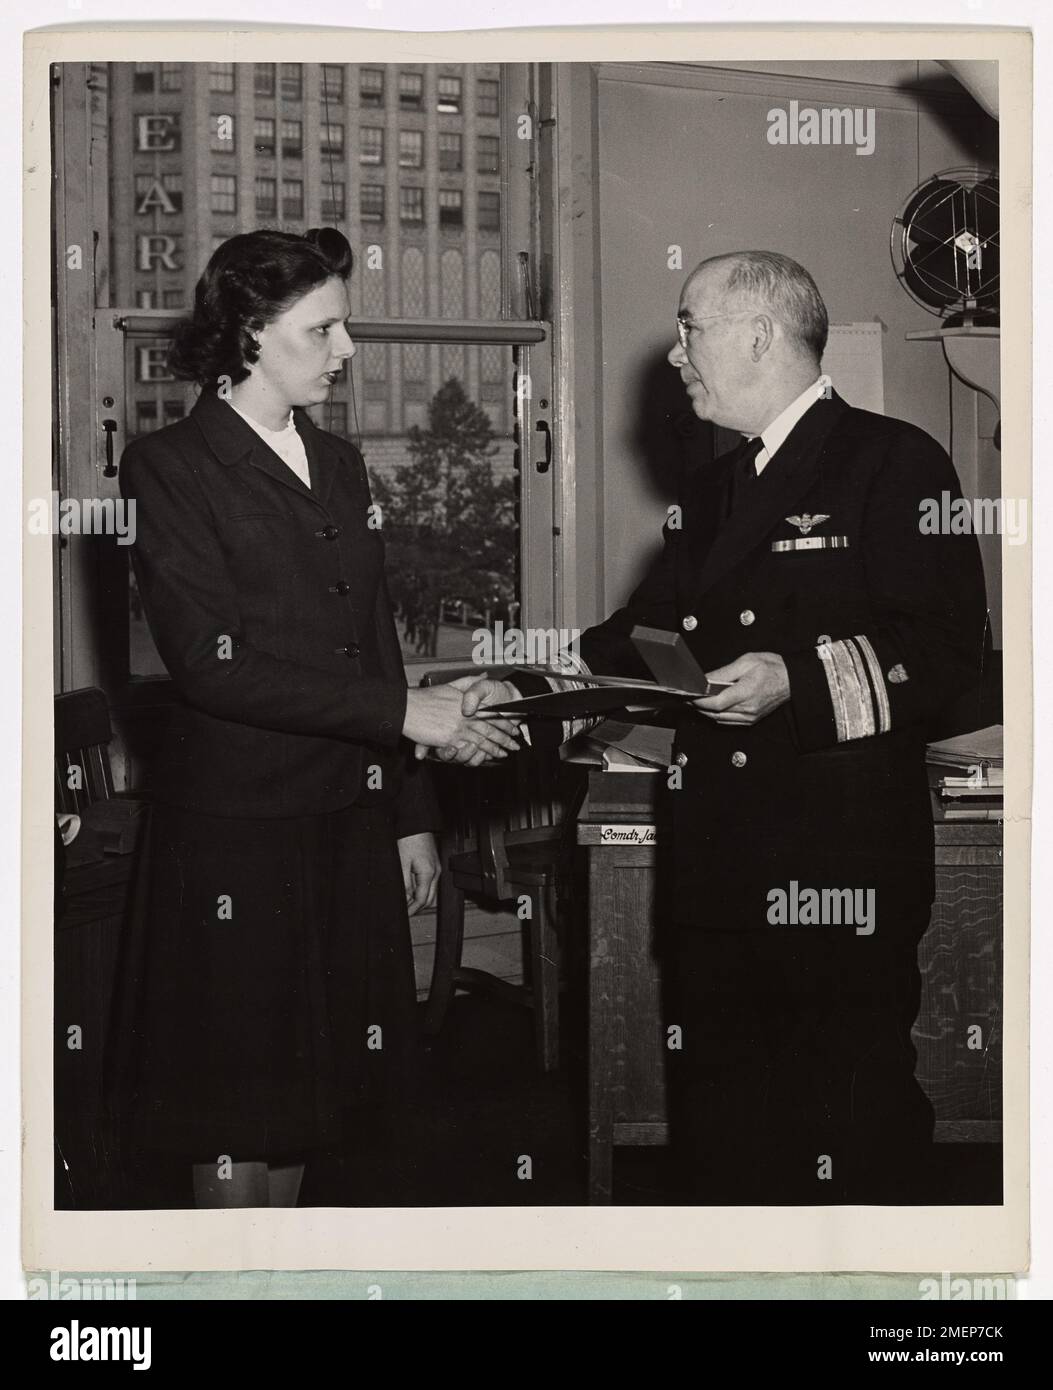 Rear Admiral Presents Purple Heart to Coast Guardsman's Widow. Rear Admiral Robert Donohue, U.S. Coast Guard, presents the Purple Heart to Mrs. Mary D. Kelley, civilian employee of the U.S. Coast Guard, whose husband, Coast Guardsman William J. Kelley, Jr. , storekeeper first class, died when his ship was torpedoed in the North Atlantic. Mrs. Kelley lives in Washington, D.C. Coast Guardsman Kelley's parents are Mr. Mrs. William J. Kelley , Sr., of Silver Spring, M.D. His brother is Captain James Ford Kelley, U.S. Army Air Forces. Stock Photo